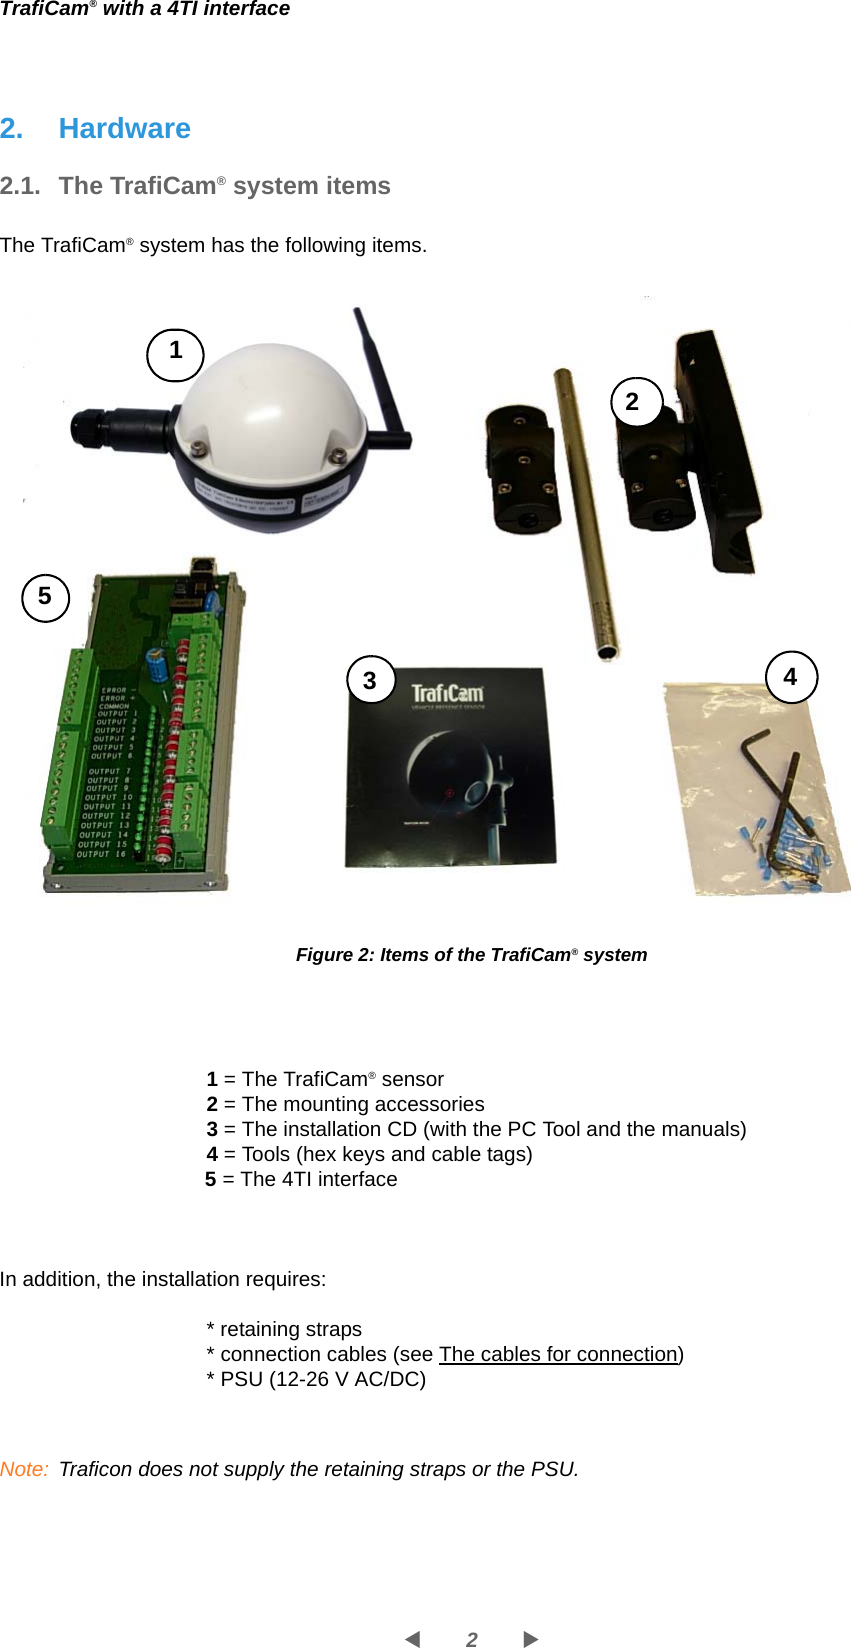 2WXTrafiCam® with a 4TI interface2. Hardware2.1. The TrafiCam® system itemsThe TrafiCam® system has the following items.Figure 2: Items of the TrafiCam® system1 = The TrafiCam® sensor2 = The mounting accessories3 = The installation CD (with the PC Tool and the manuals)4 = Tools (hex keys and cable tags)5 = The 4TI interfaceIn addition, the installation requires:* retaining straps* connection cables (see The cables for connection)* PSU (12-26 V AC/DC)Note: Traficon does not supply the retaining straps or the PSU.15234